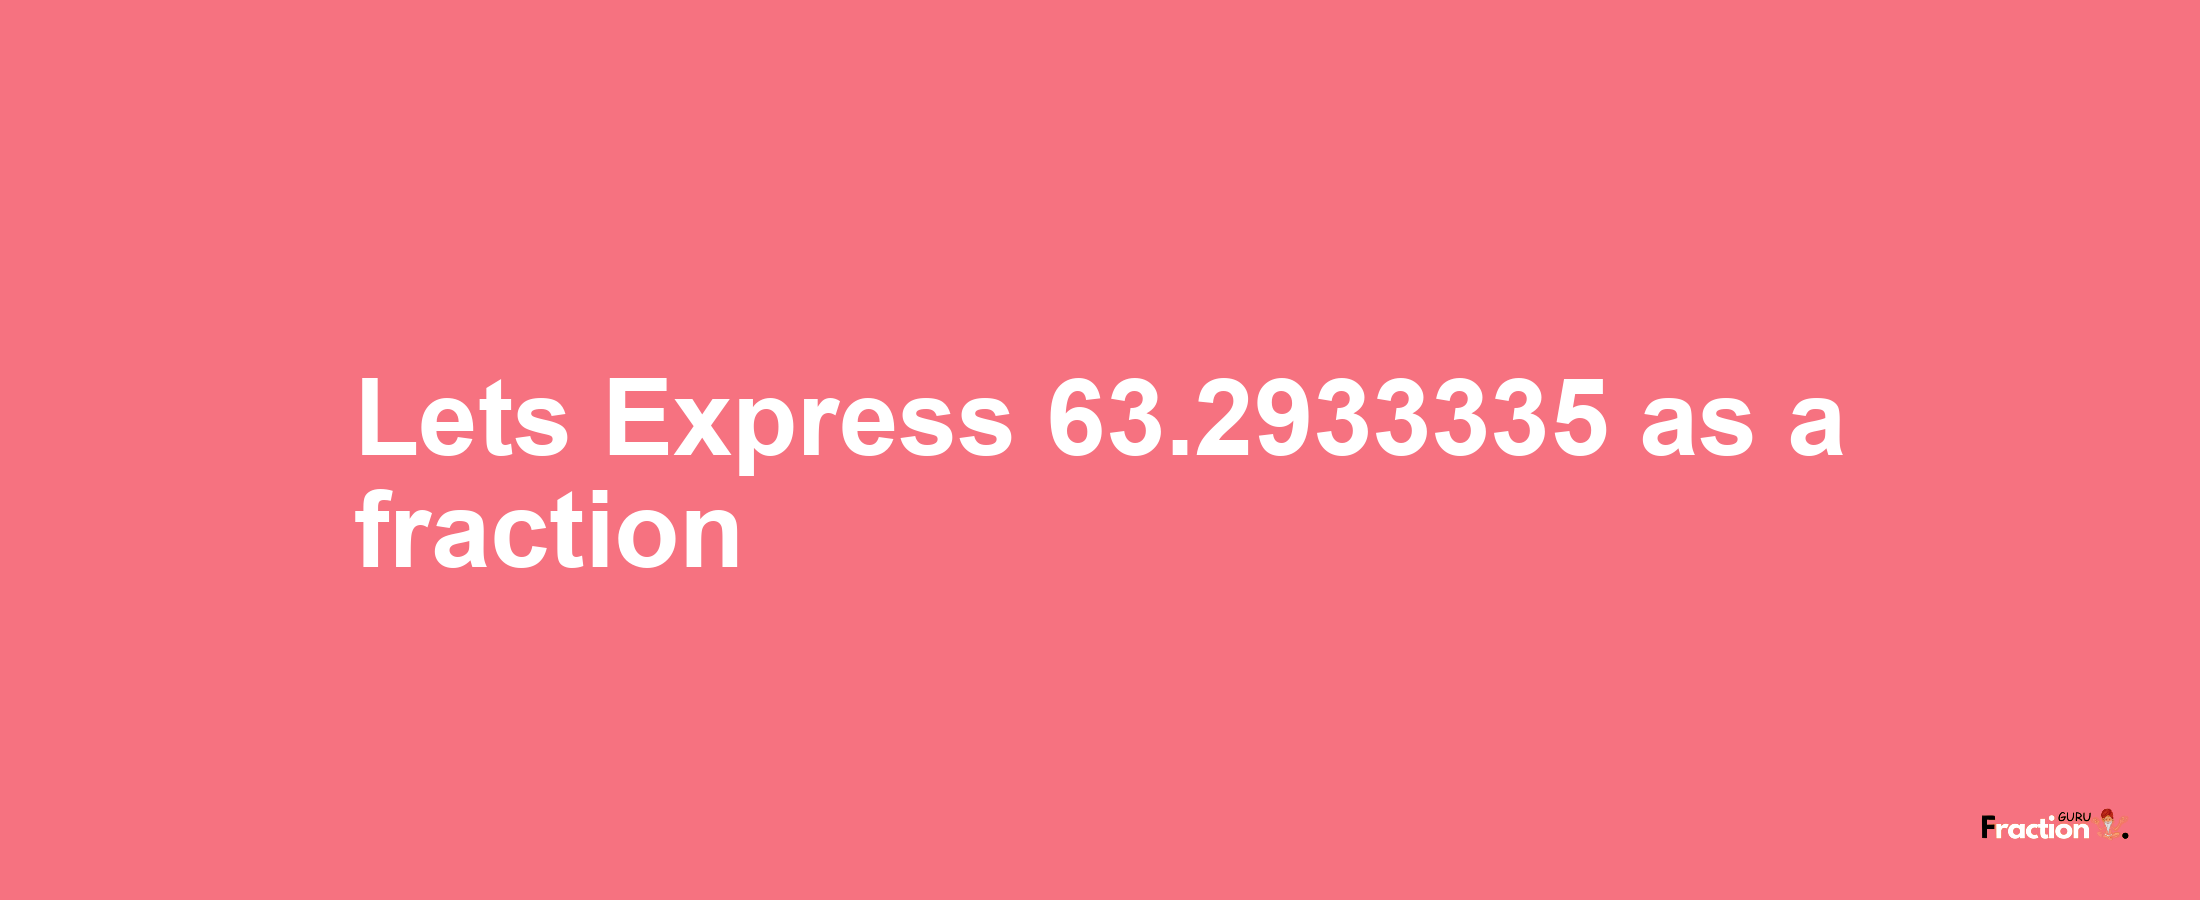 Lets Express 63.2933335 as afraction